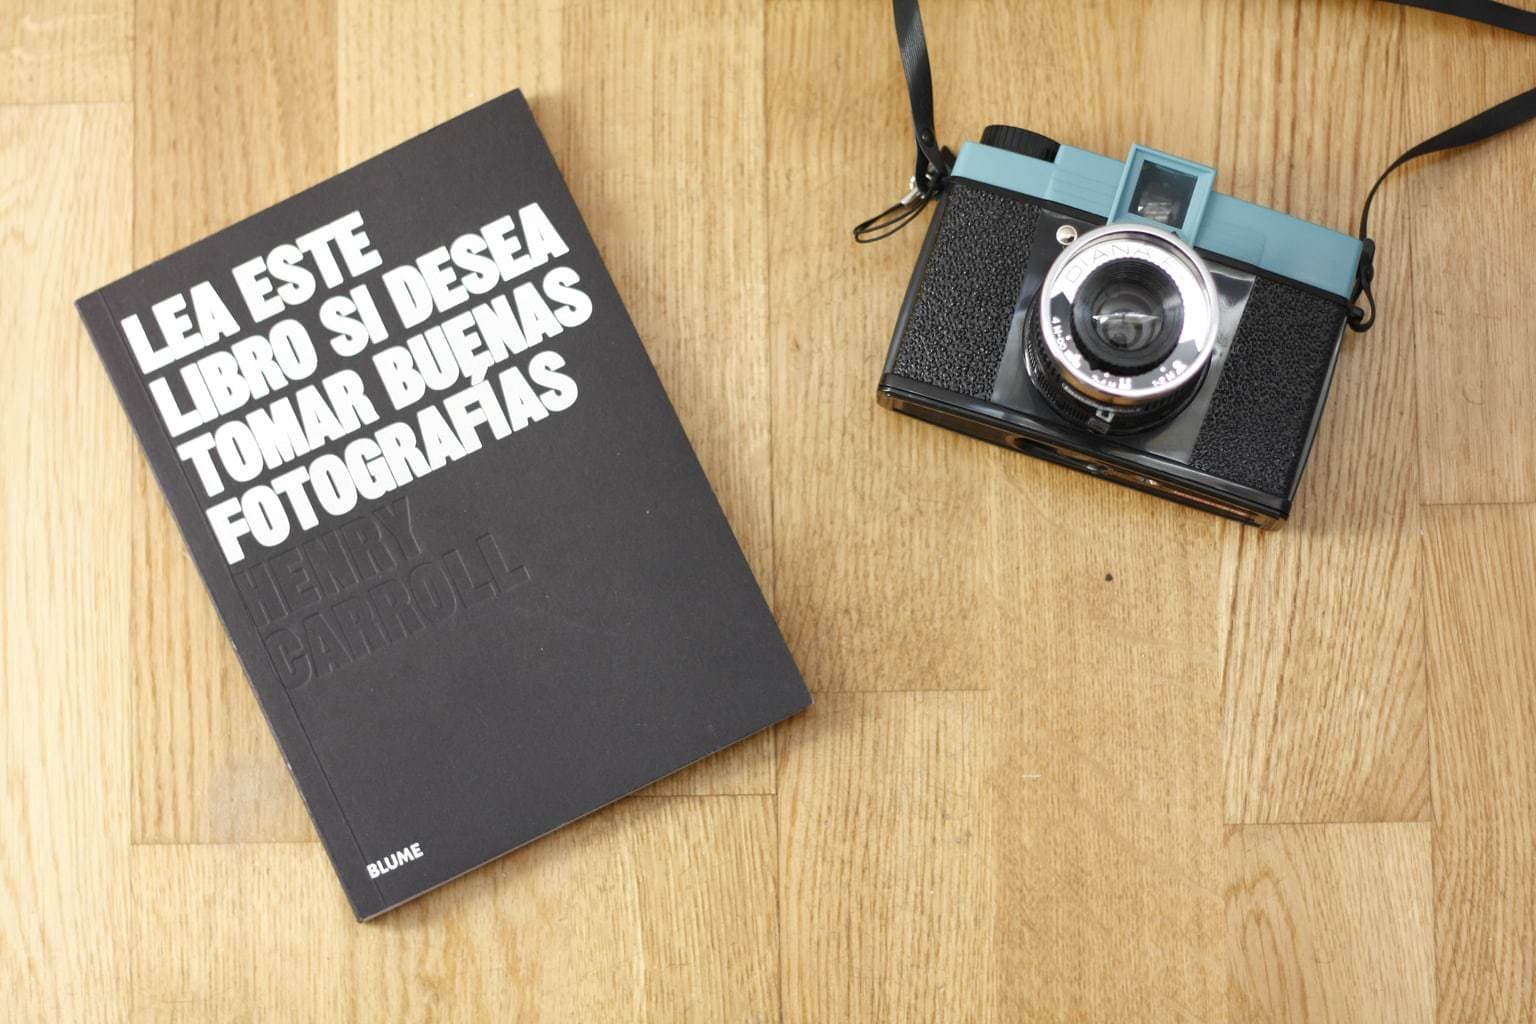 BOOK RECOMMENDATION: READ THIS BOOK IF YOU WANT TO TAKE GOOD PICTURES